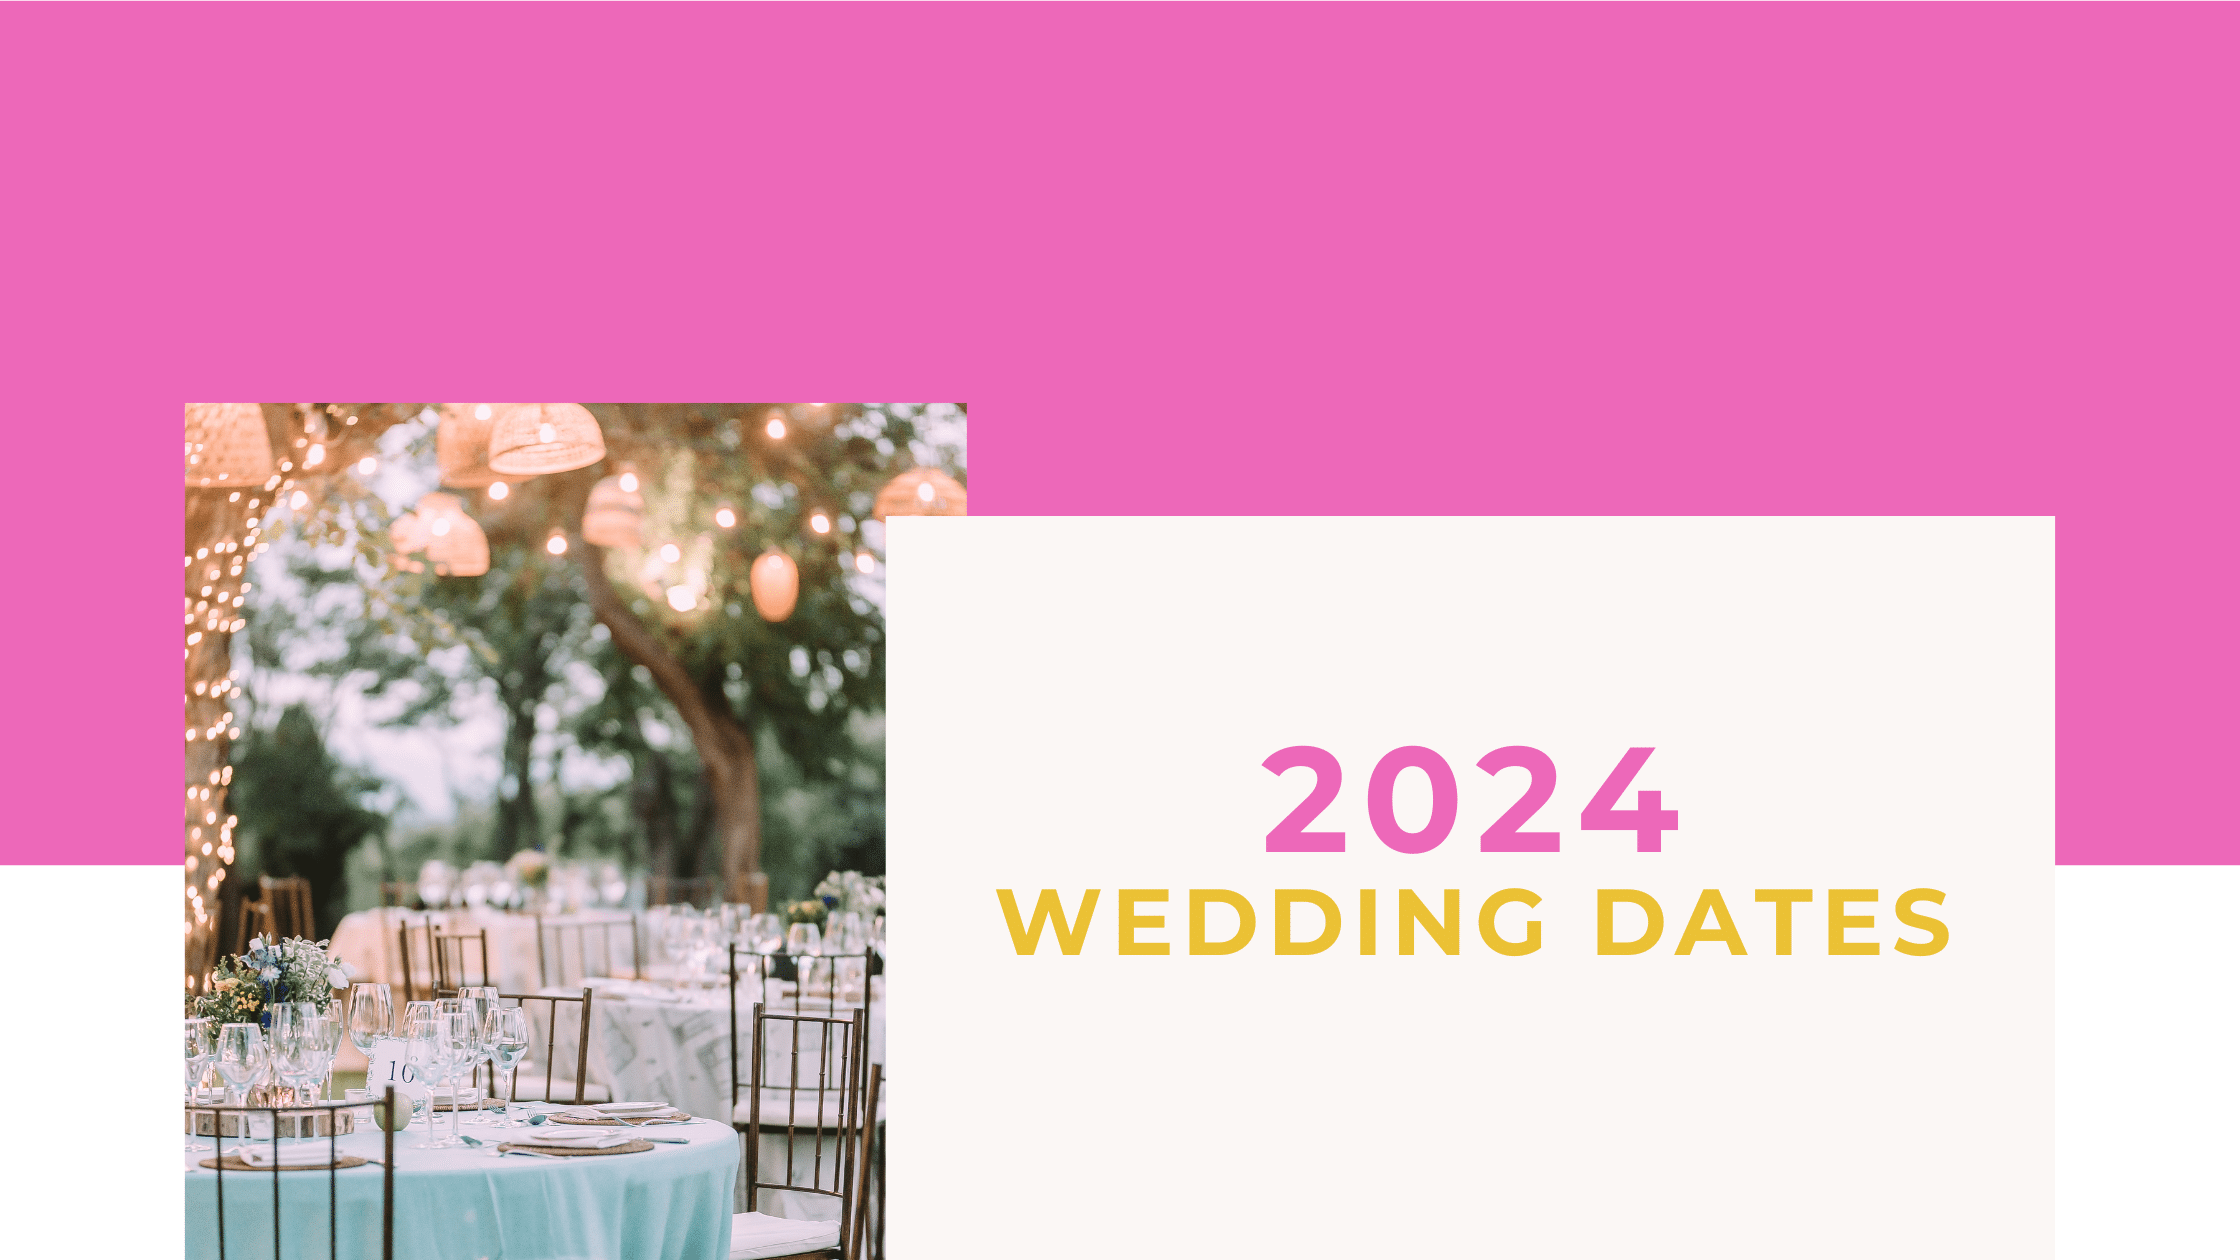 The best dates to get married in 2024